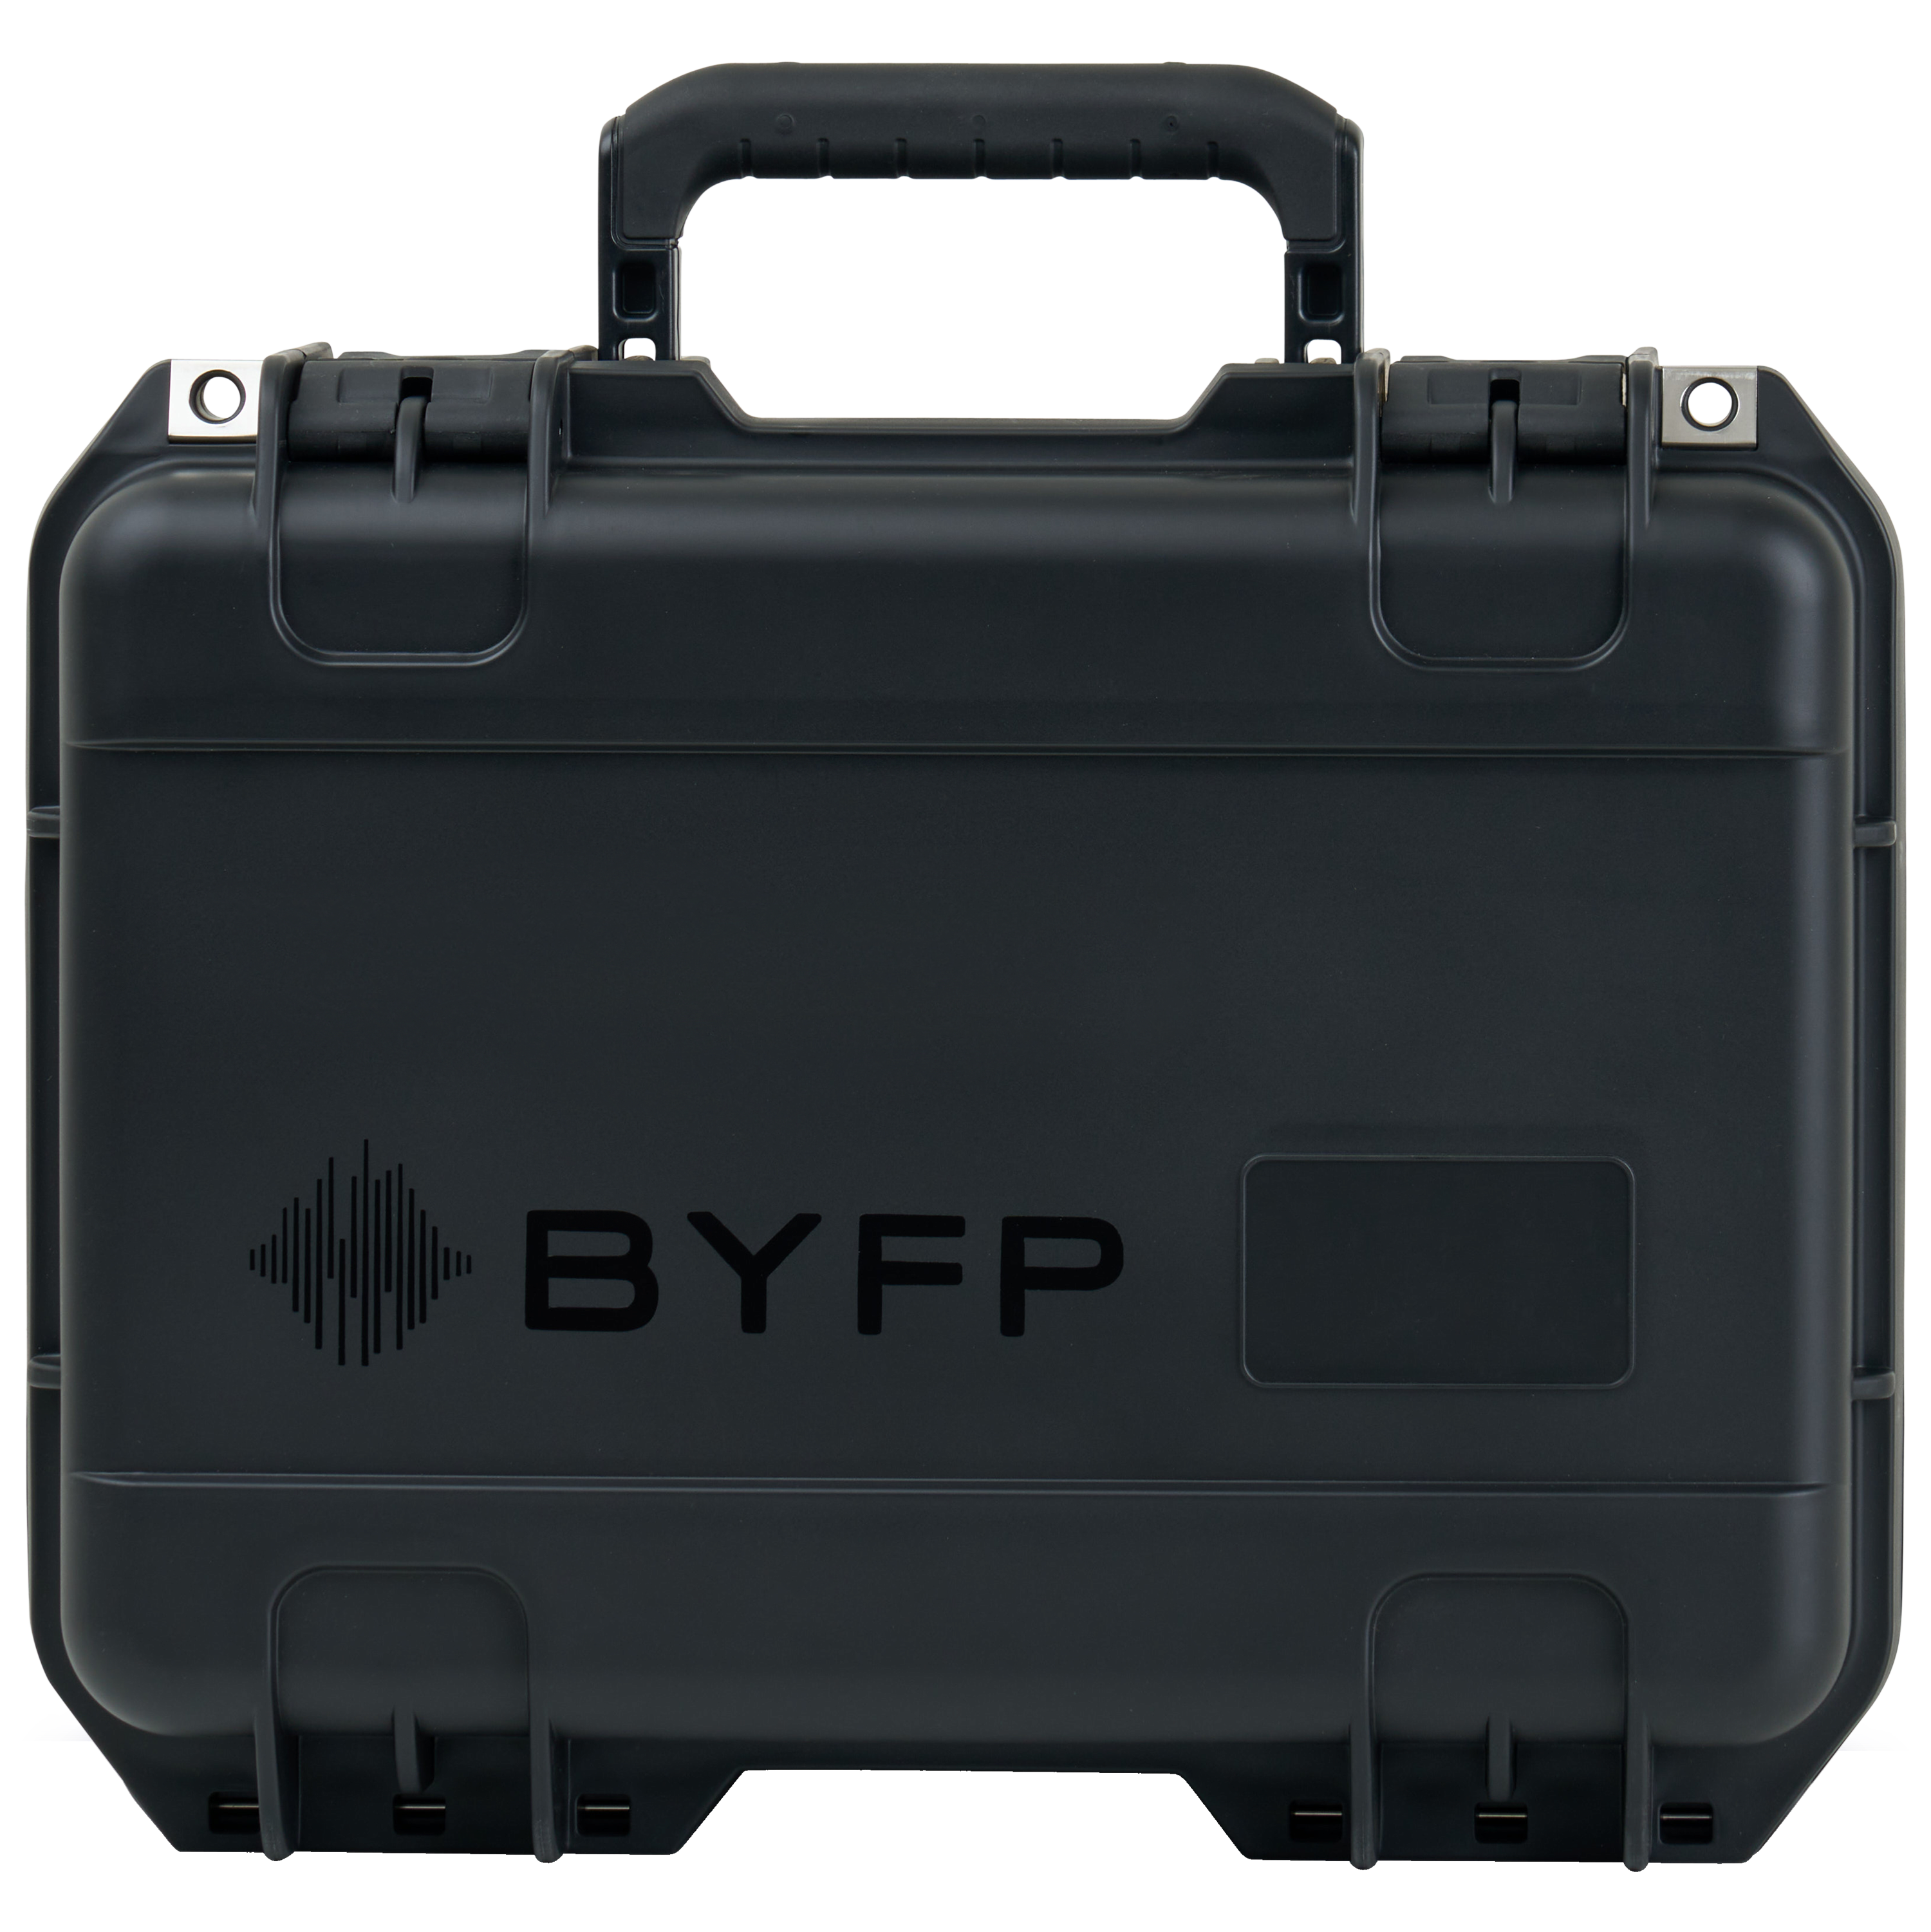 BYFP ipCase for 4x Roland VC-1 Series Converters